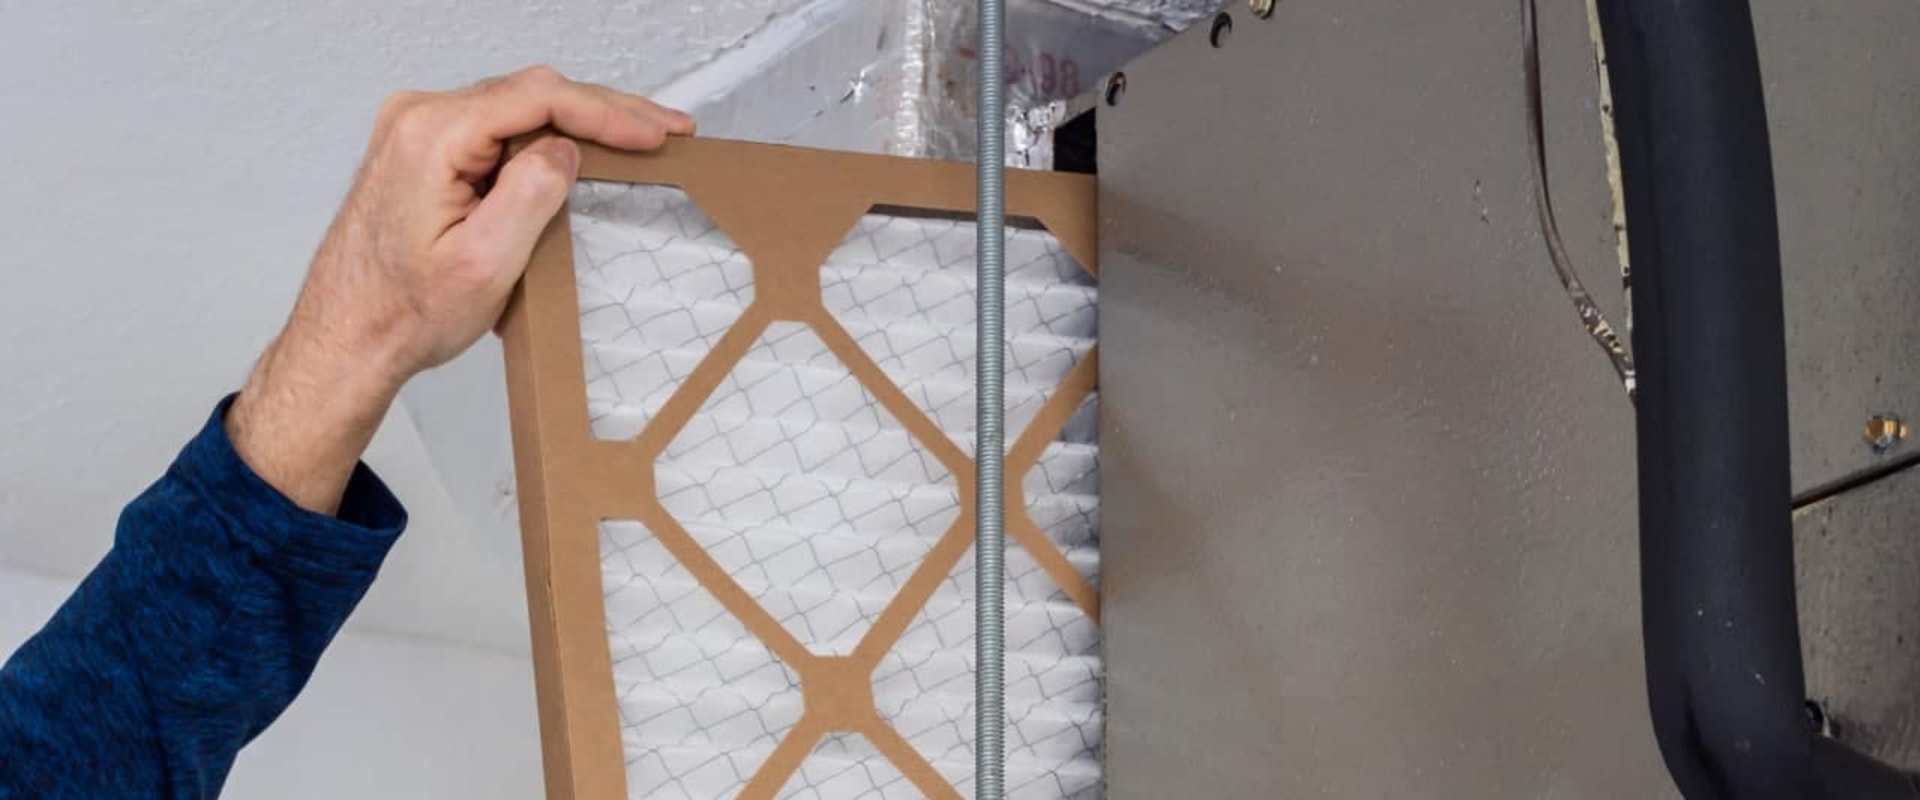 How Often Should You Change a 20x25x4 Furnace Filter?